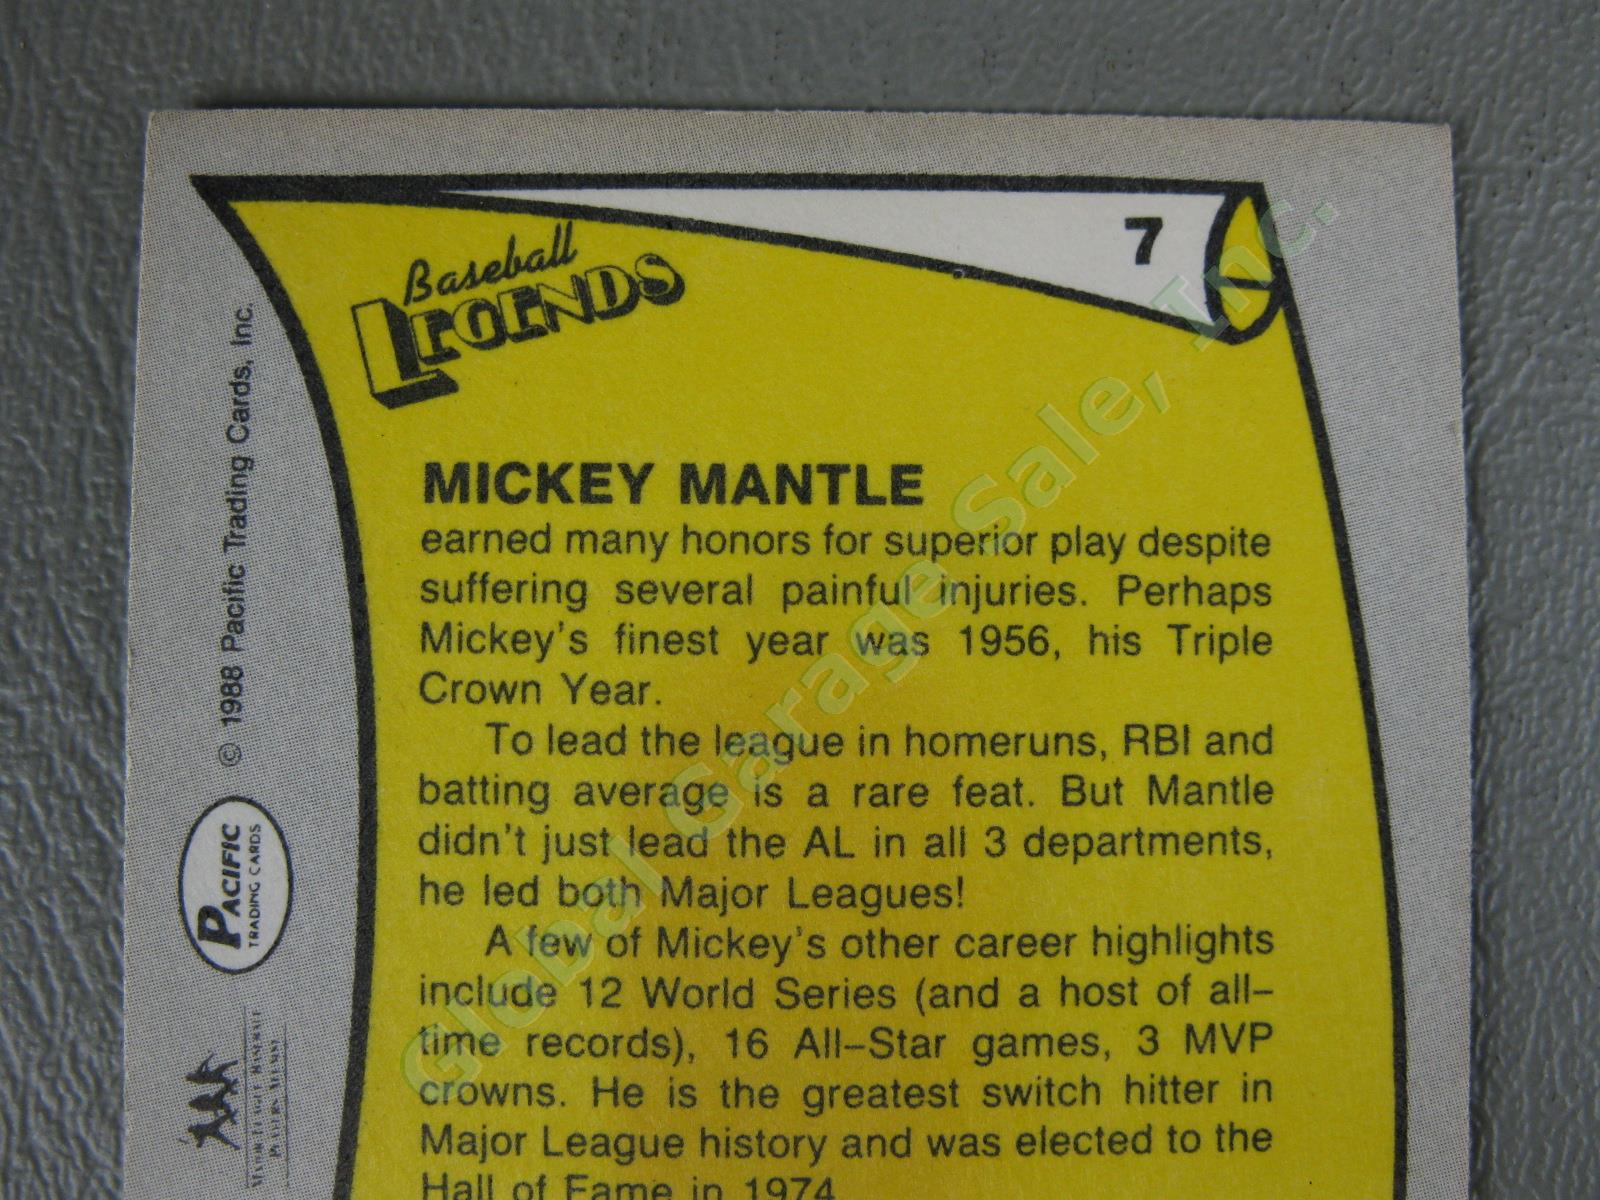 Mickey Mantle Hand Signed Baseball Card Legends #7 JSA Authenticated NY Yankees 4